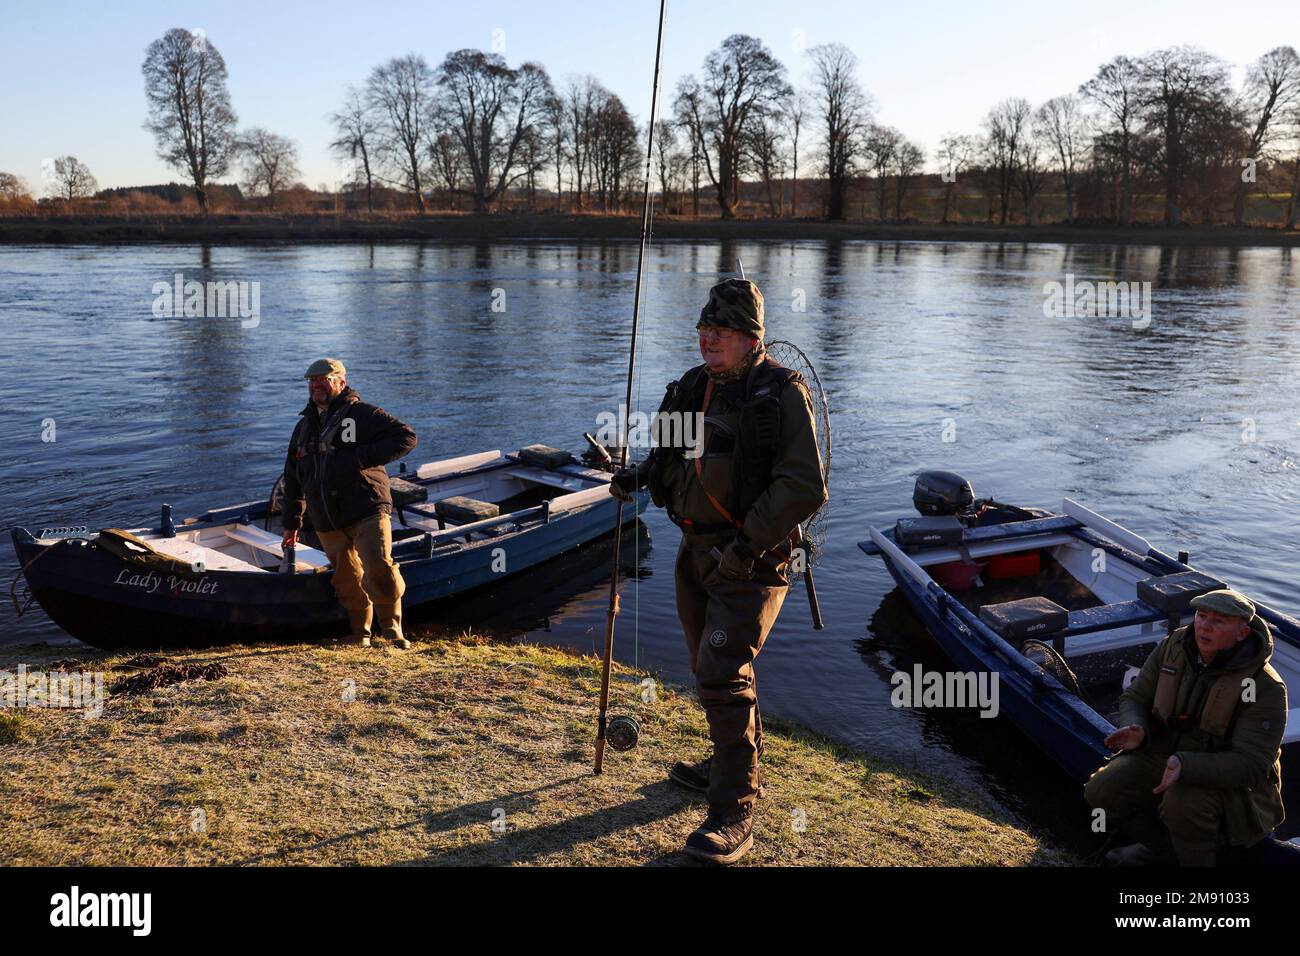 An angler waits on the bank on the opening day of the salmon fishing season on the river Tay at Meikleour fisheries, Scotland, Britain, January 16, 2023. REUTERS/Russell Cheyne Stock Photo